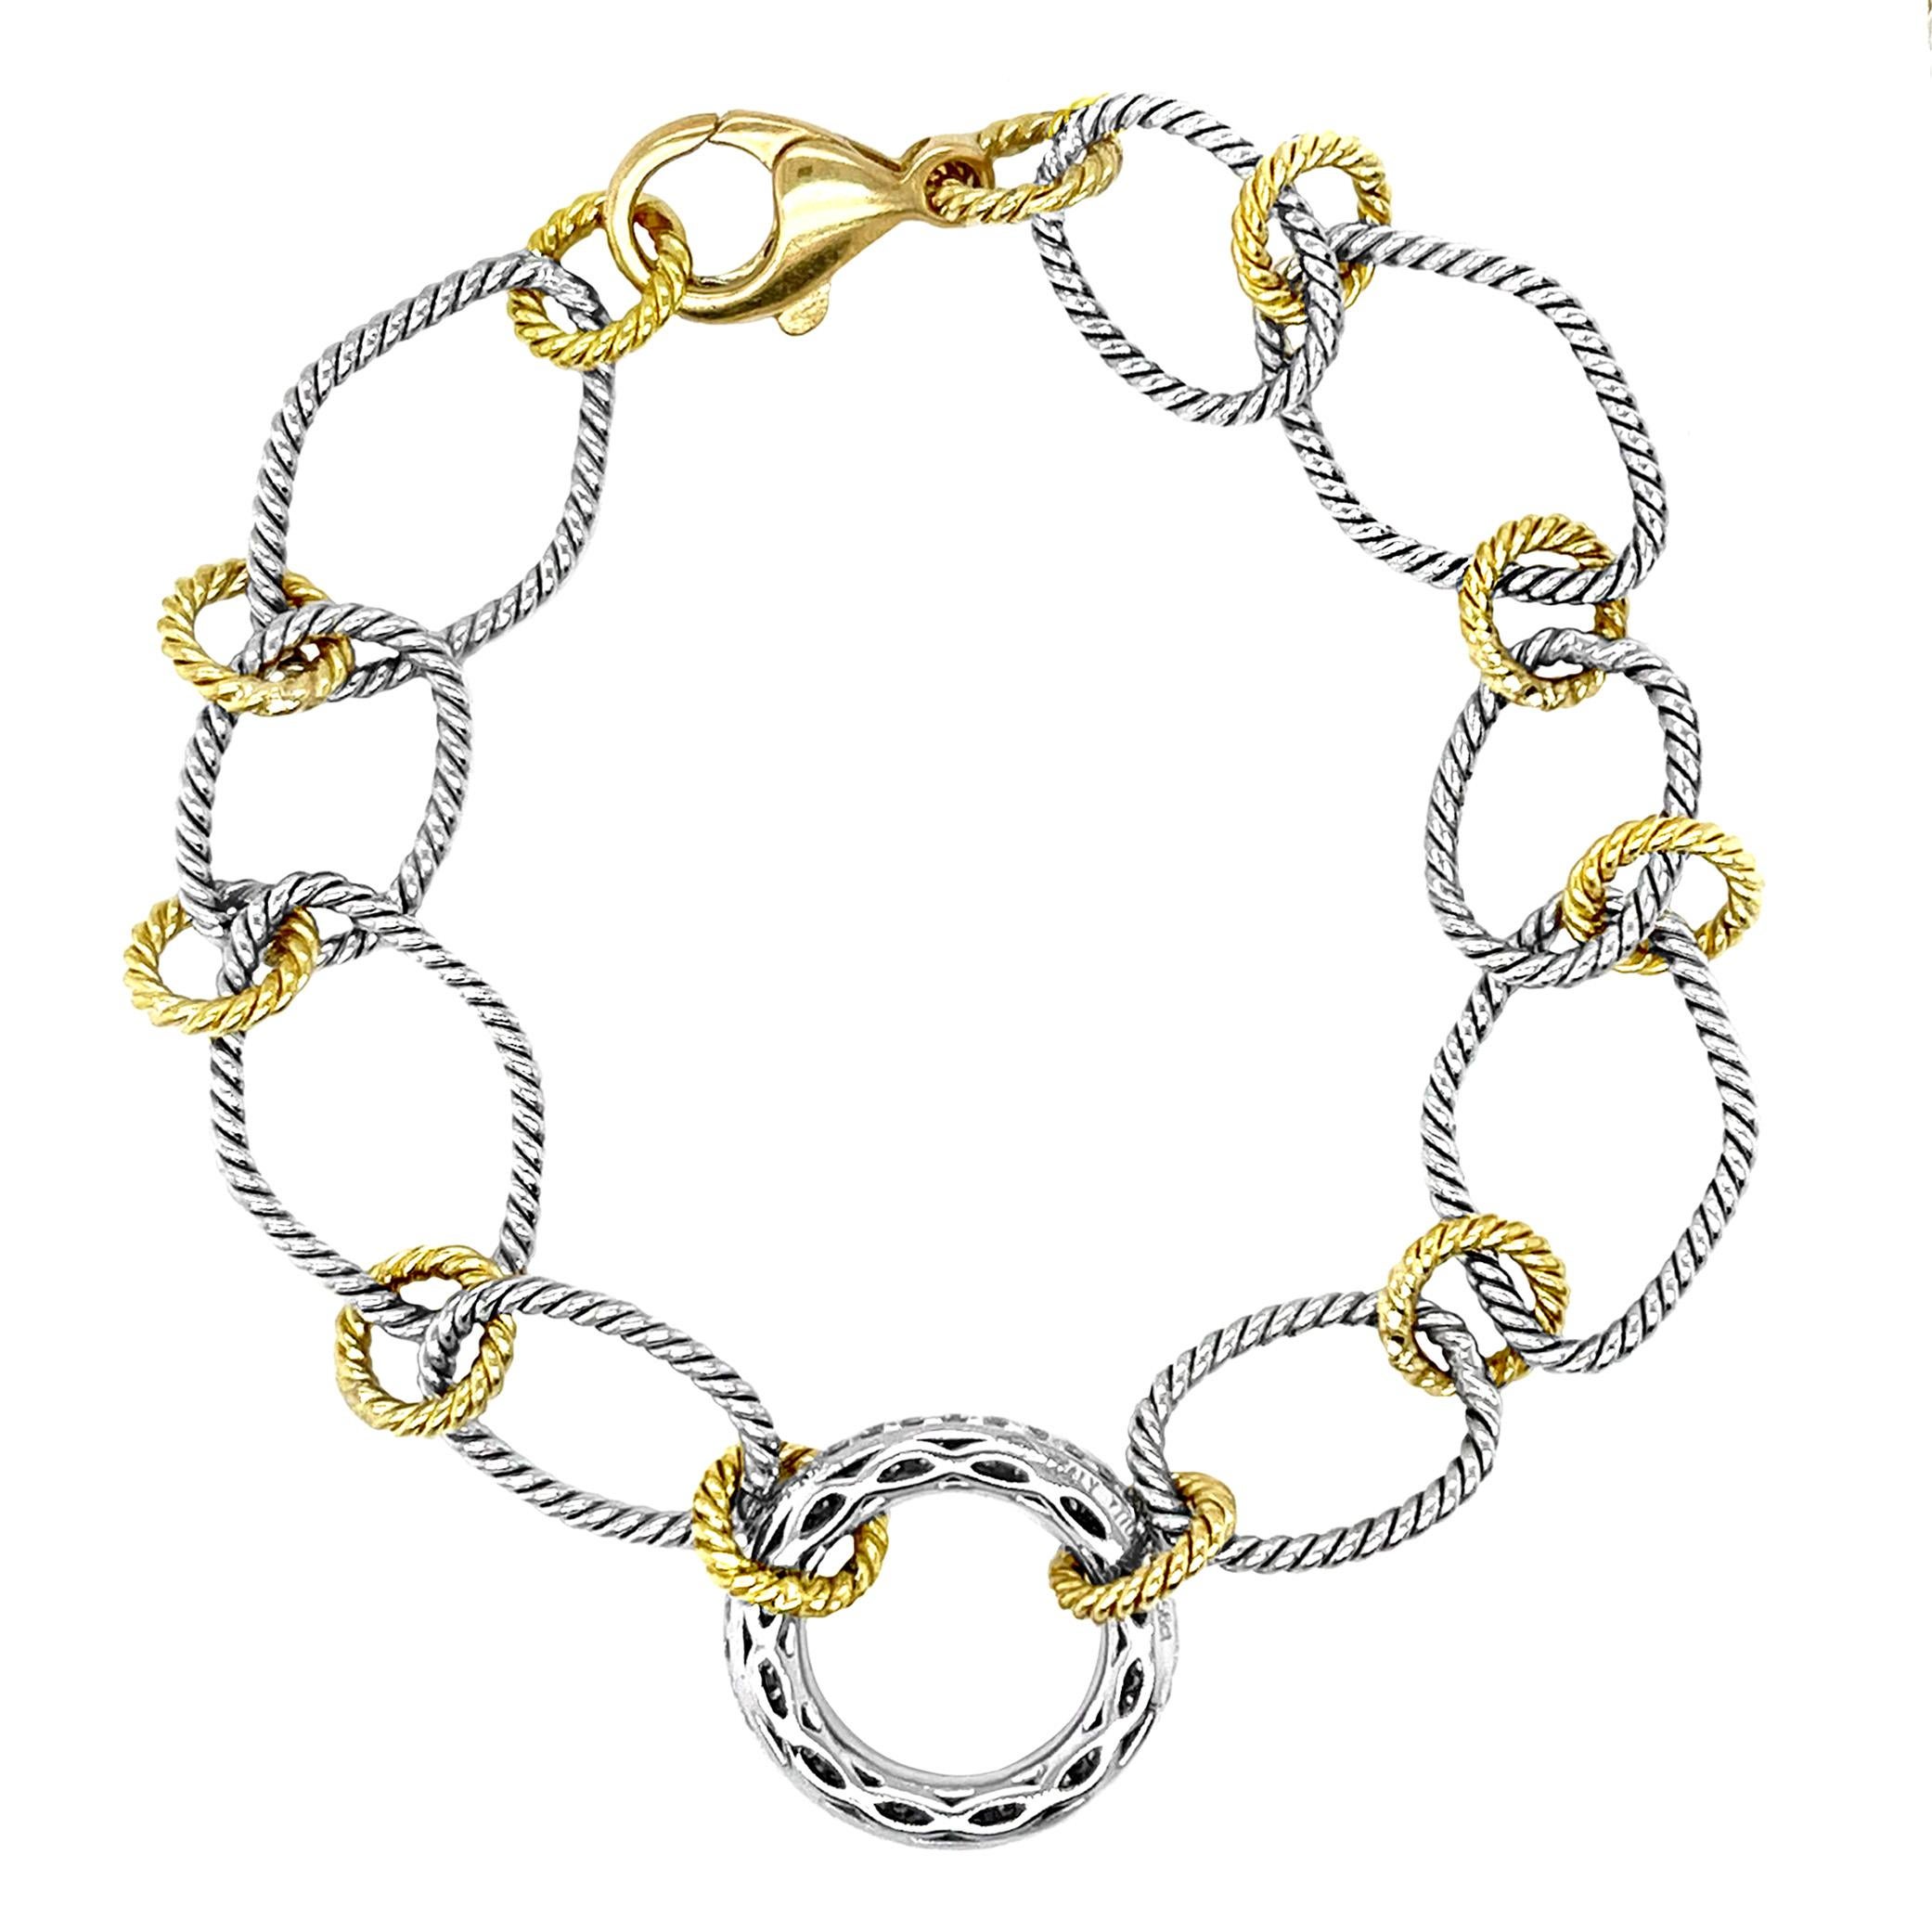 Produced by award winning Italian designer Stefano Vitolo. Stefano creates custom artisanal one of a kind jewelry with excellent gemstones in a truly old world Italian craftmanship.
This handcrafted bracelet has 0.56  total carat weight of F/G